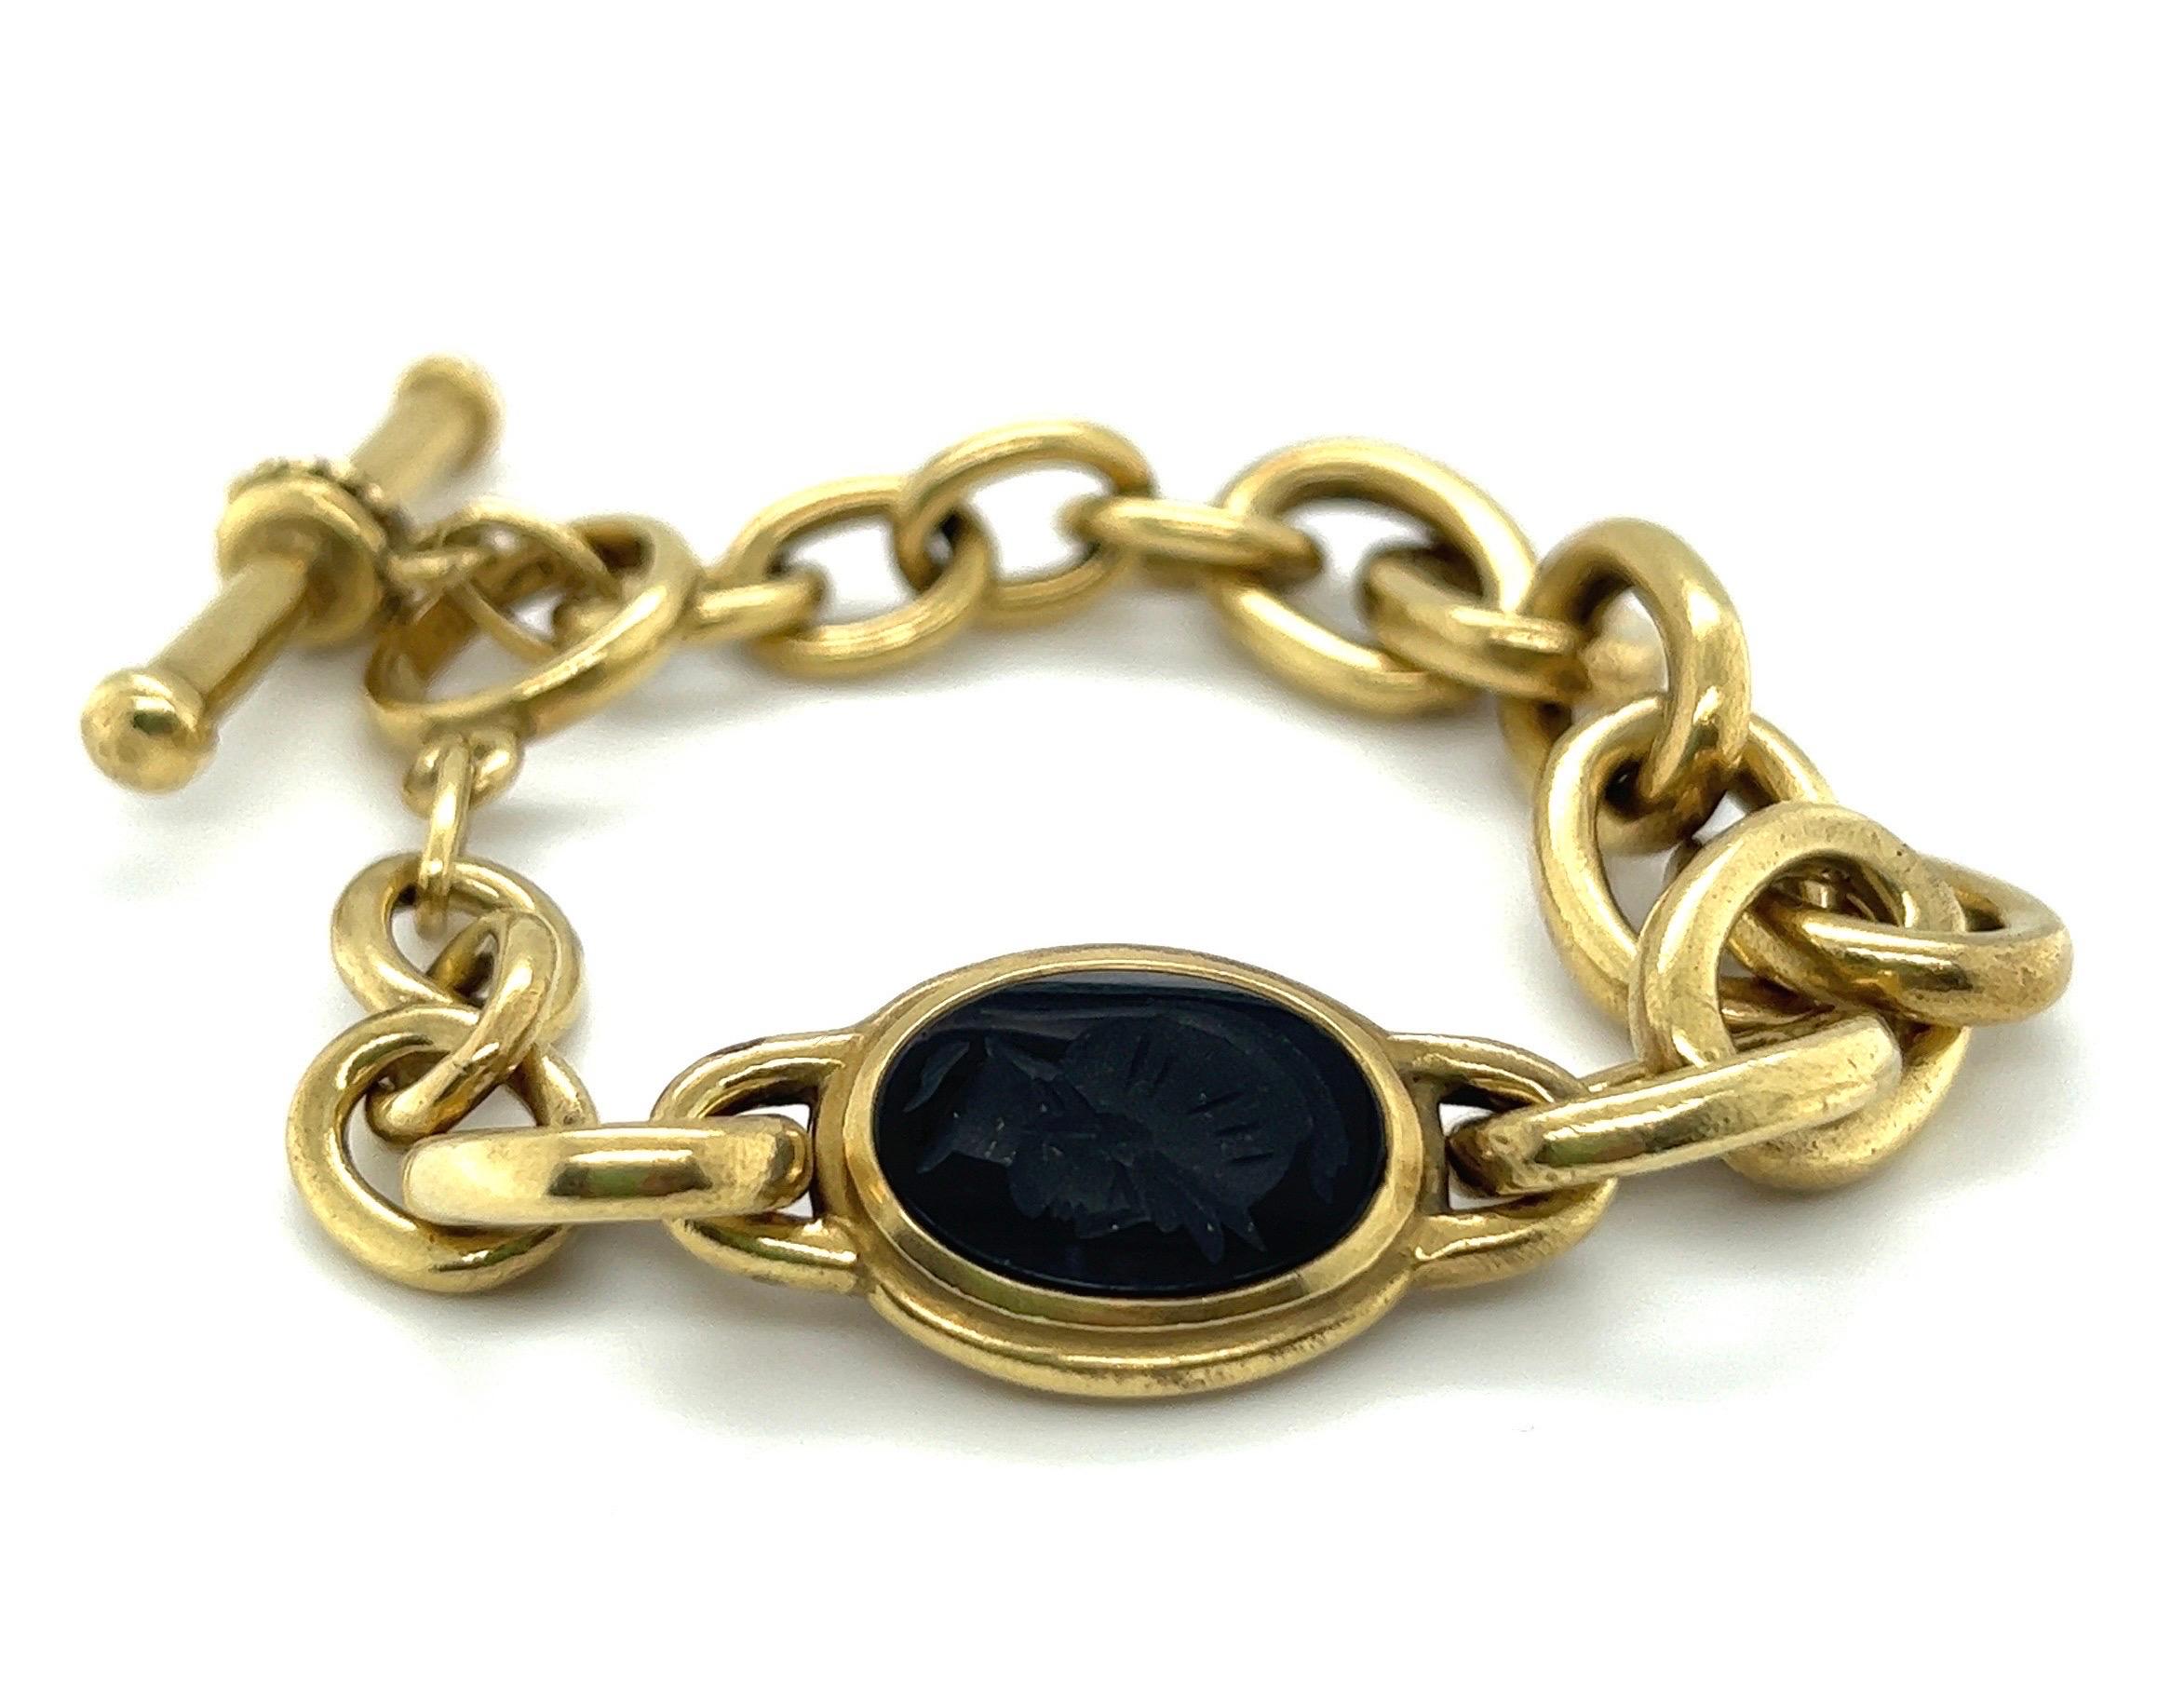 Superb 18 karat yellow gold, carnelian and onyx bracelet by Vahe Naltchayan, 1987.

Cable chain bracelet composed of bold oval yellow gold links and decorated with an oval, double-sided carnelian / onyx intaglio, each displaying the profile portrait